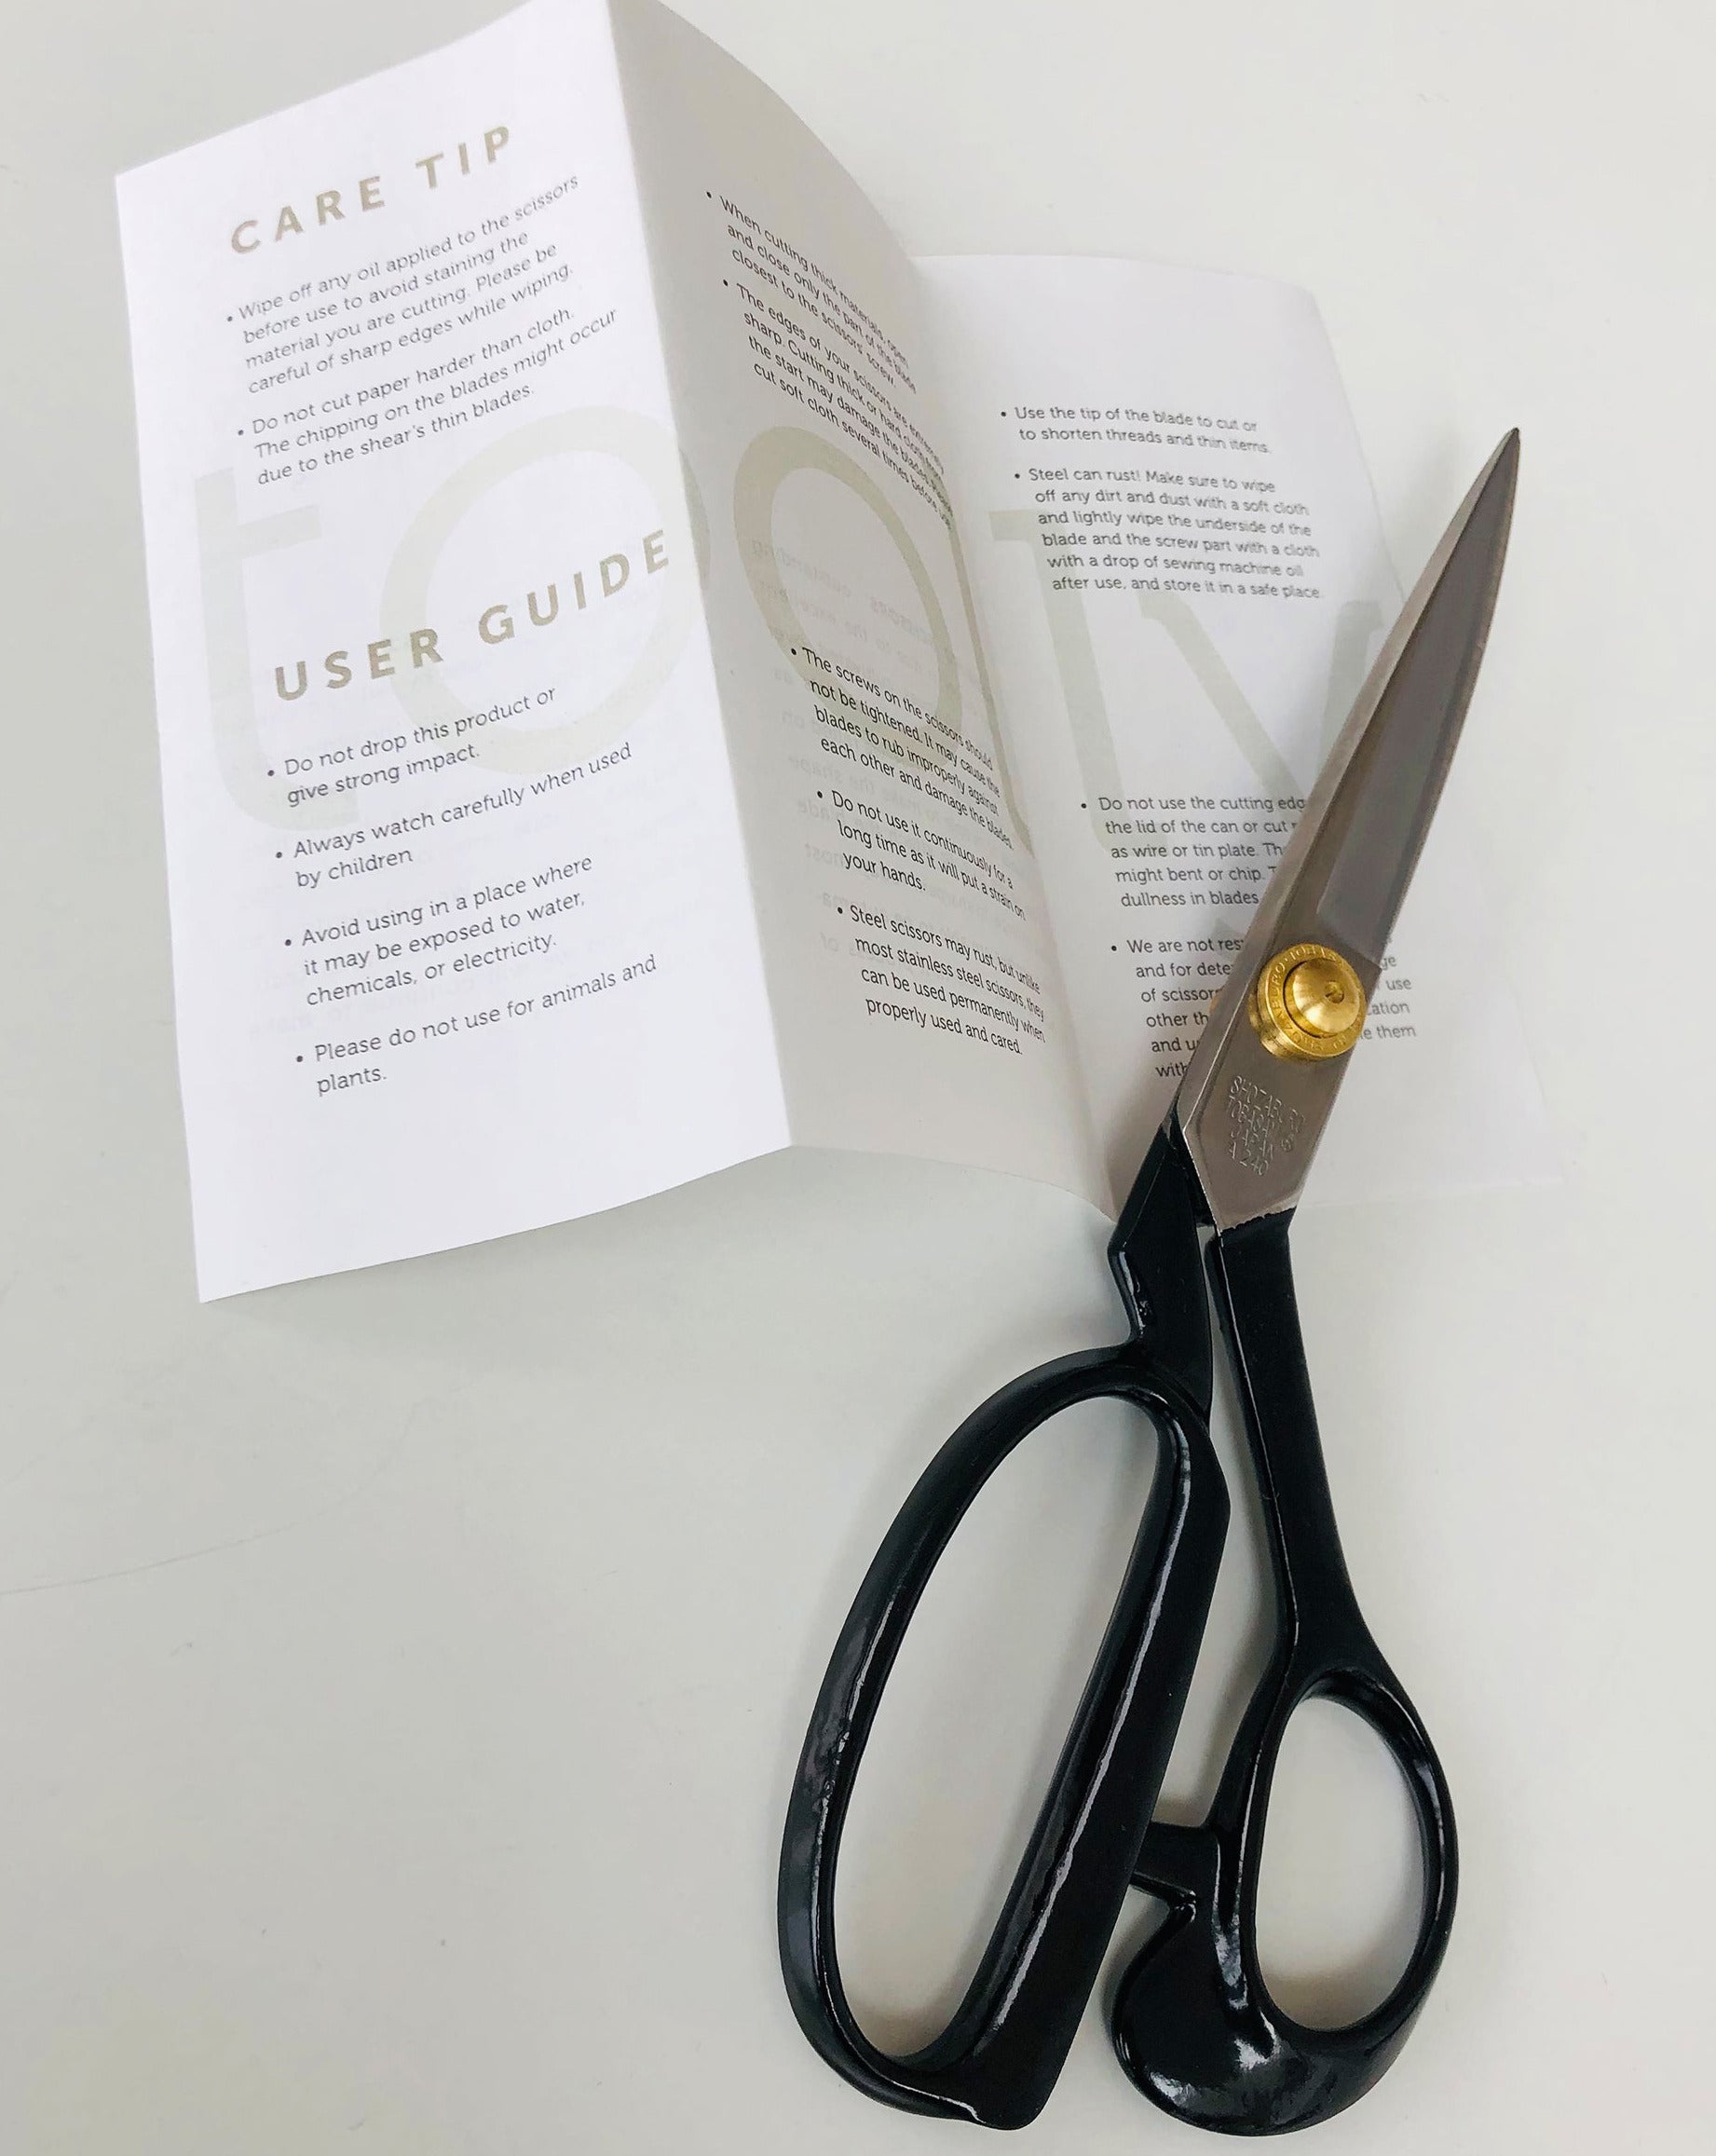 Japanese Tailor shears with user's guide